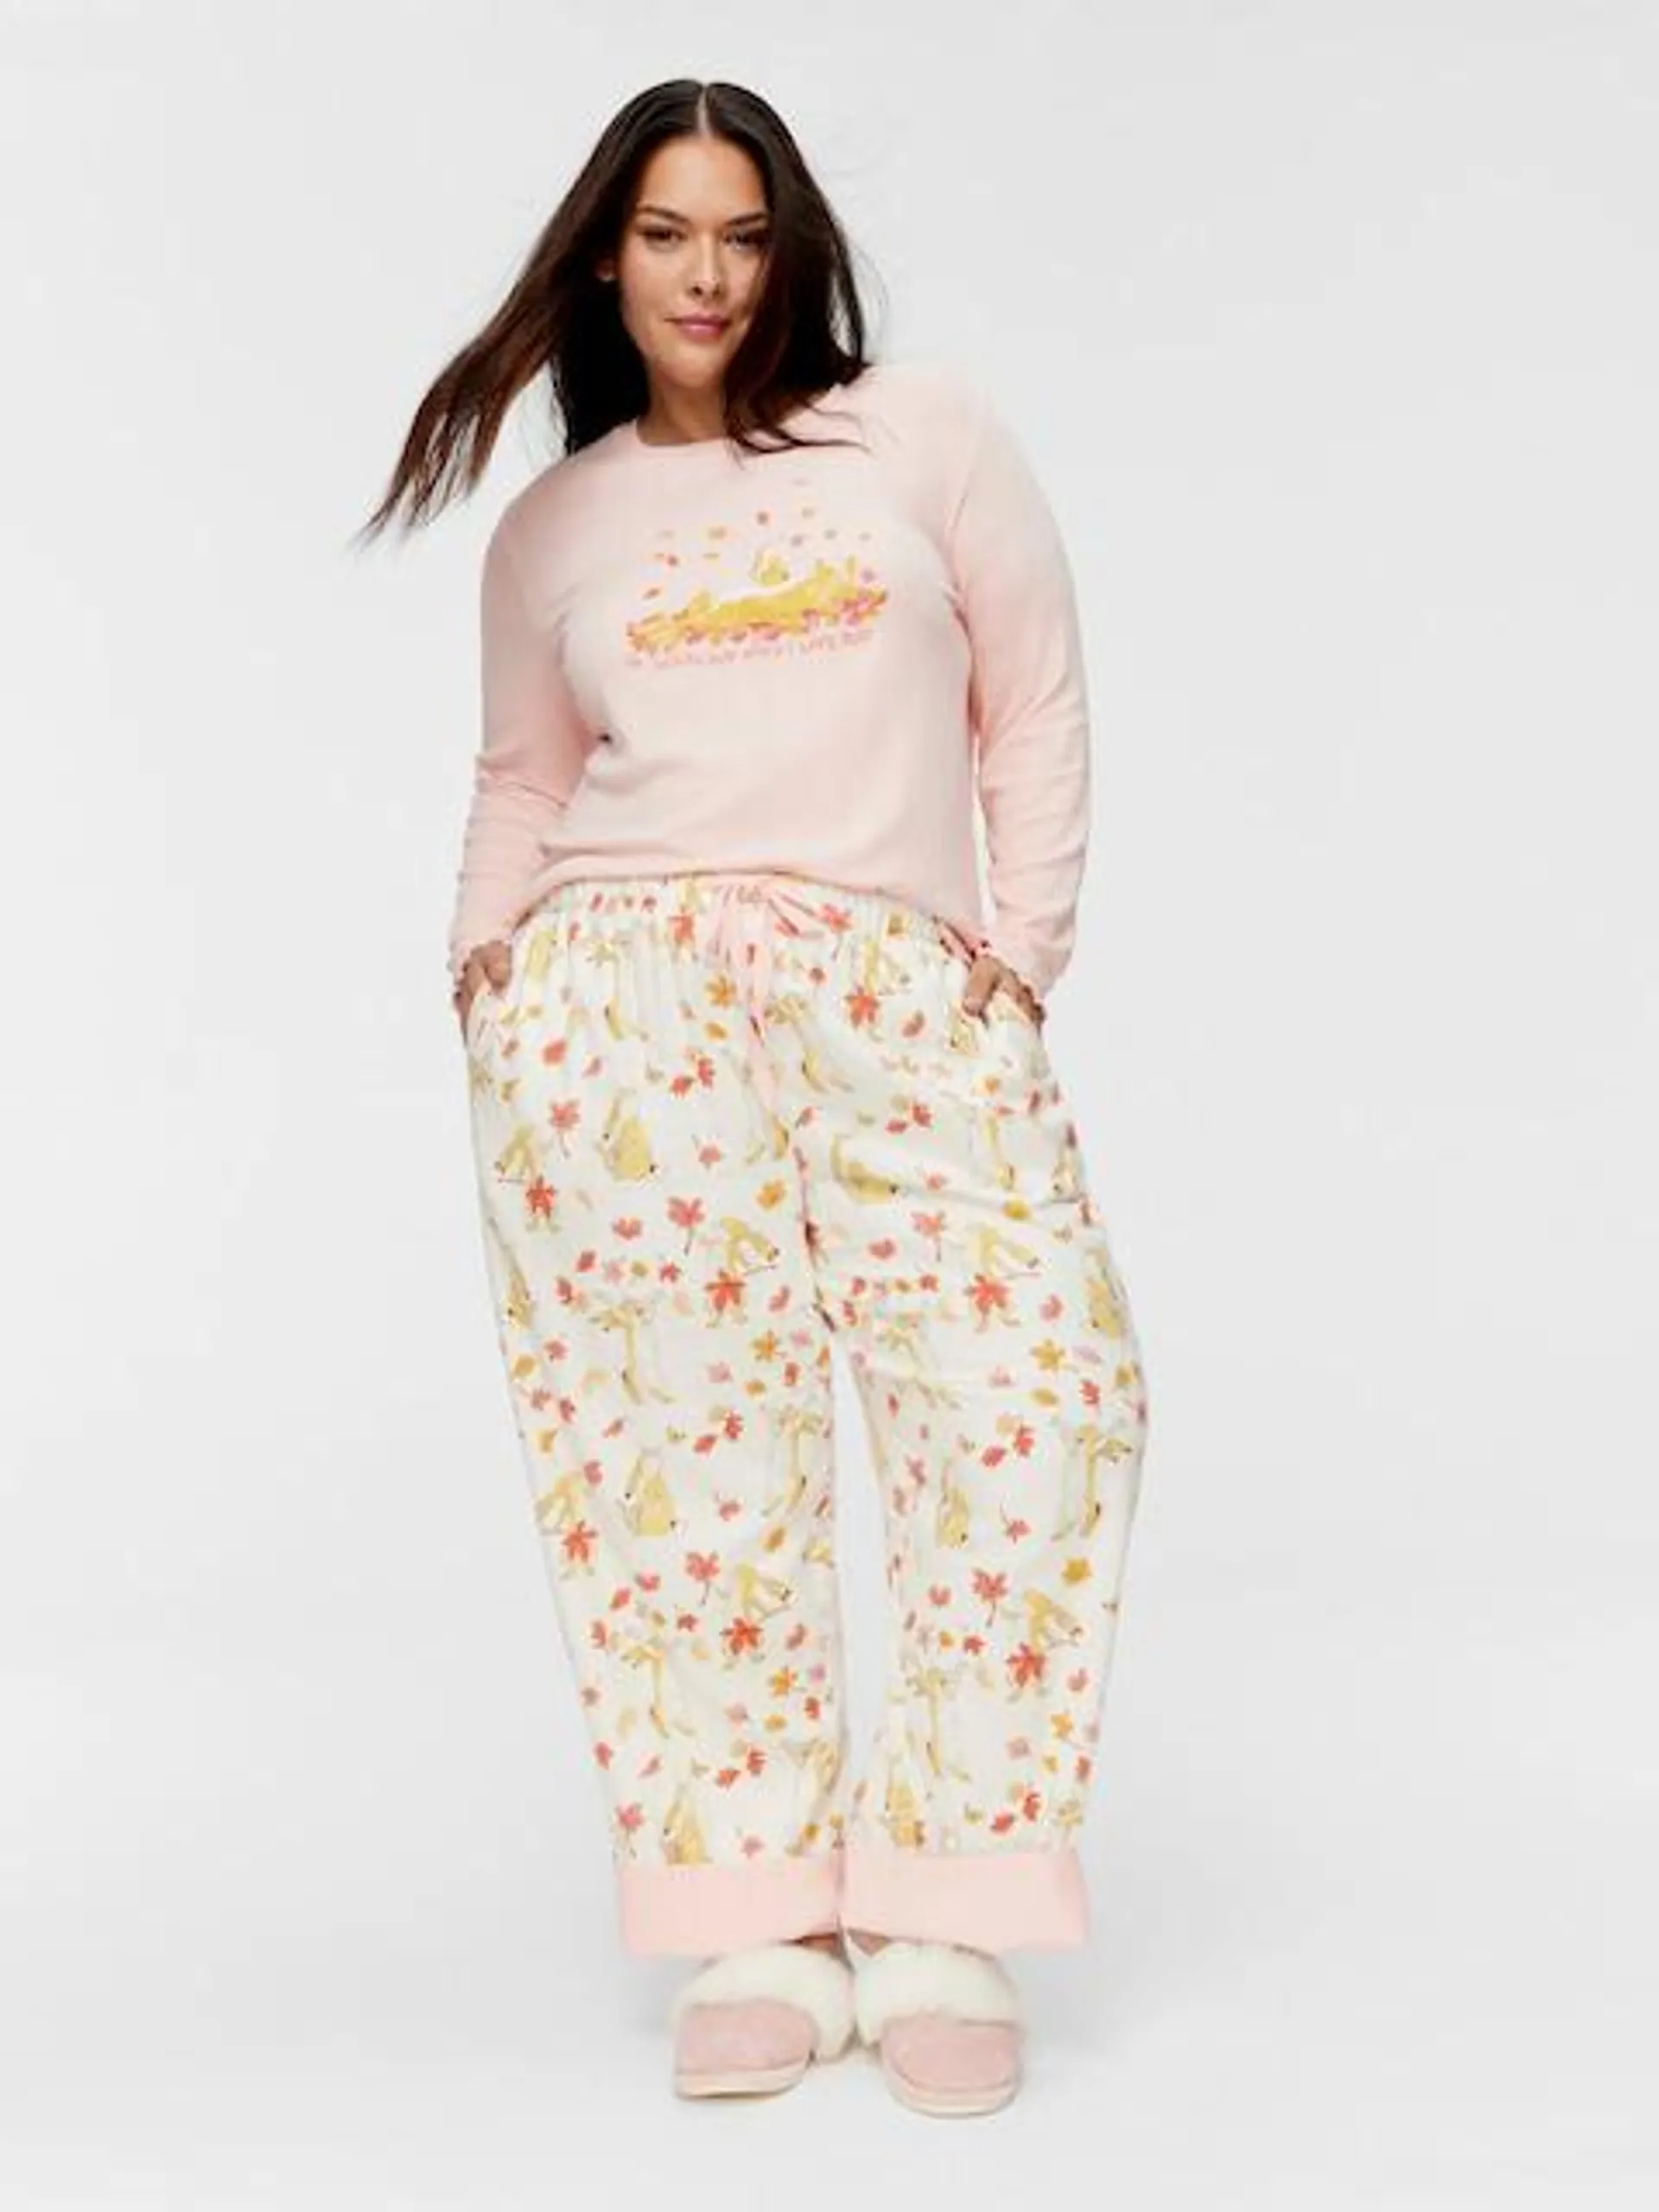 P.A. Plus Guess How Much I Love You Flannelette Pj Pant